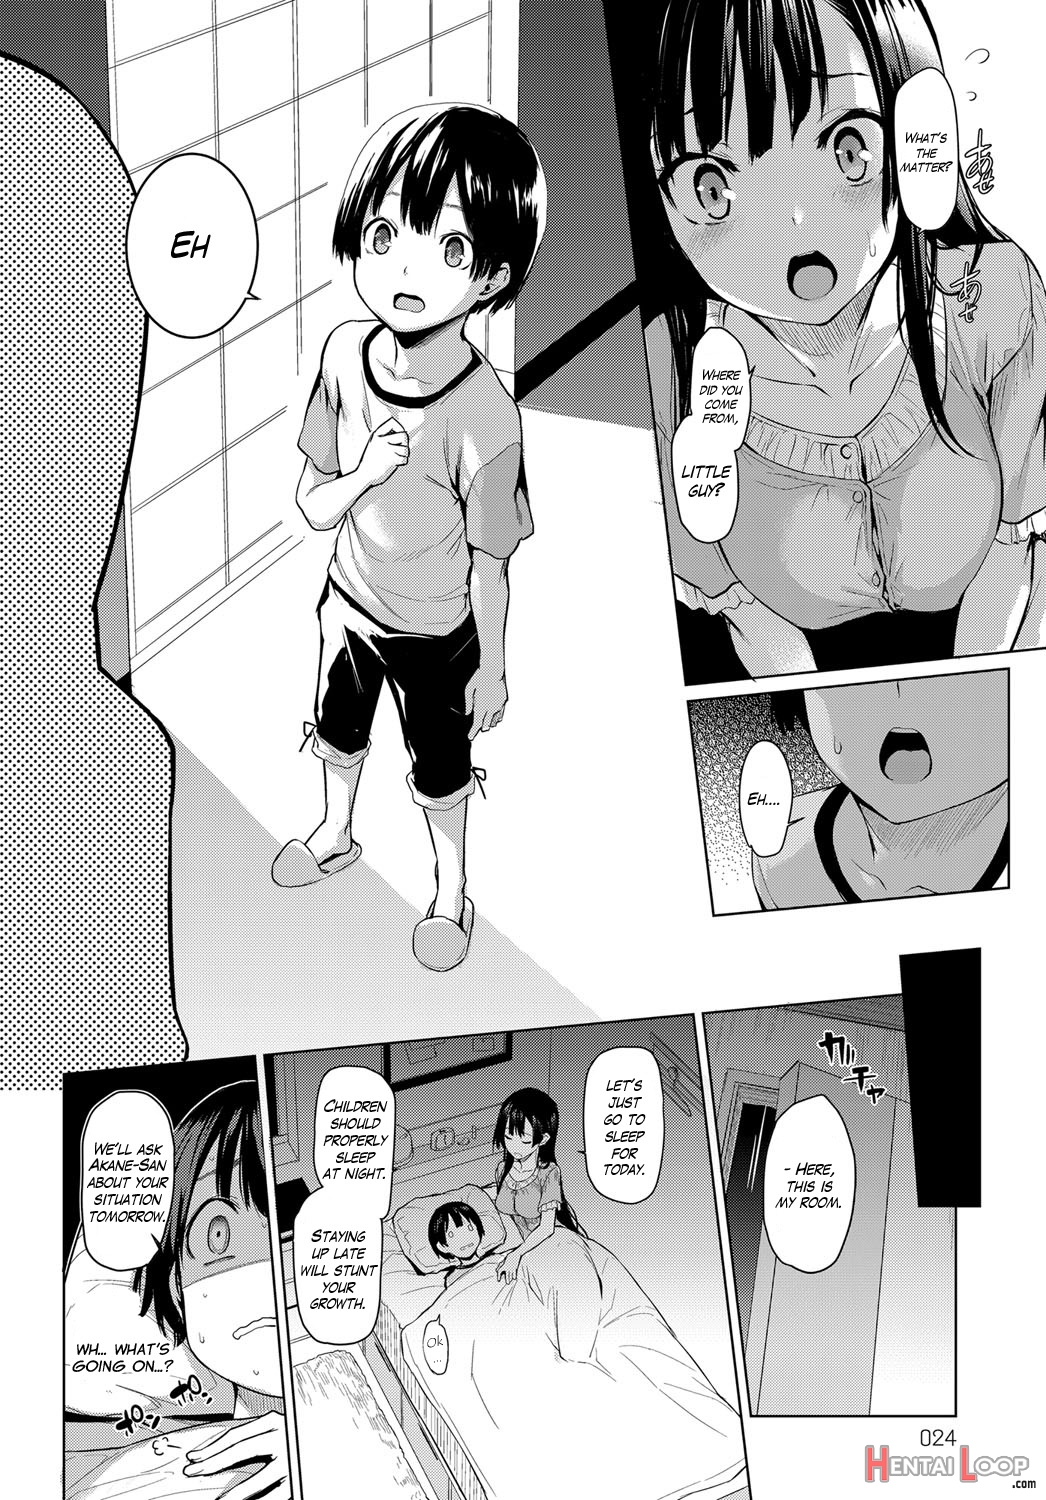 Older Sister Experience - The Girls' Dormitory page 10